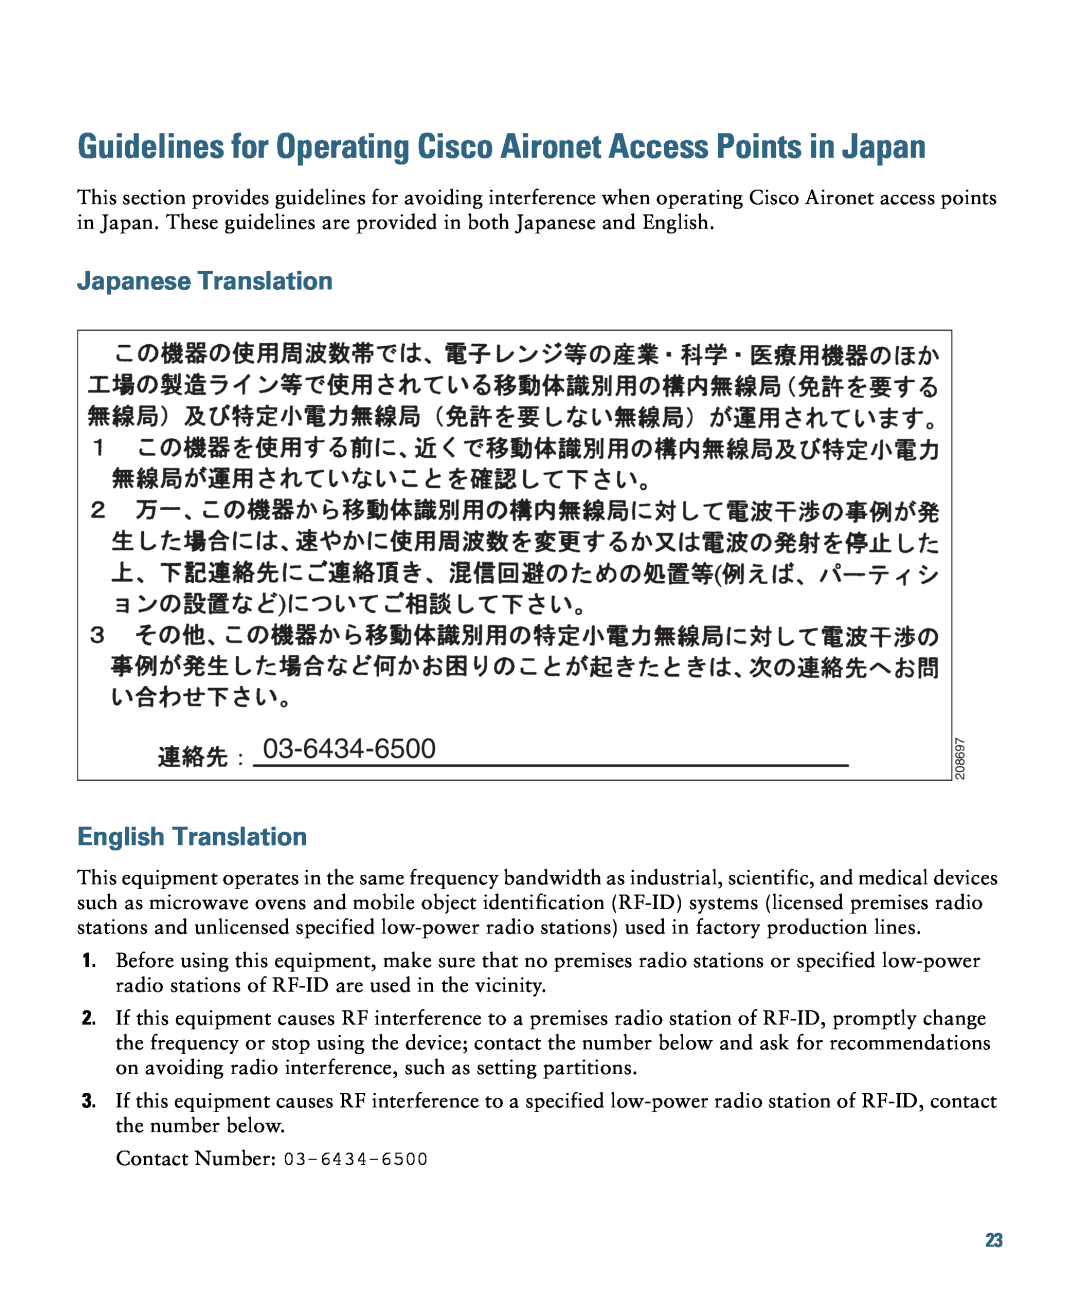 Cisco Systems AIRCAP2602EAK9, 2600 Guidelines for Operating Cisco Aironet Access Points in Japan, Japanese Translation 